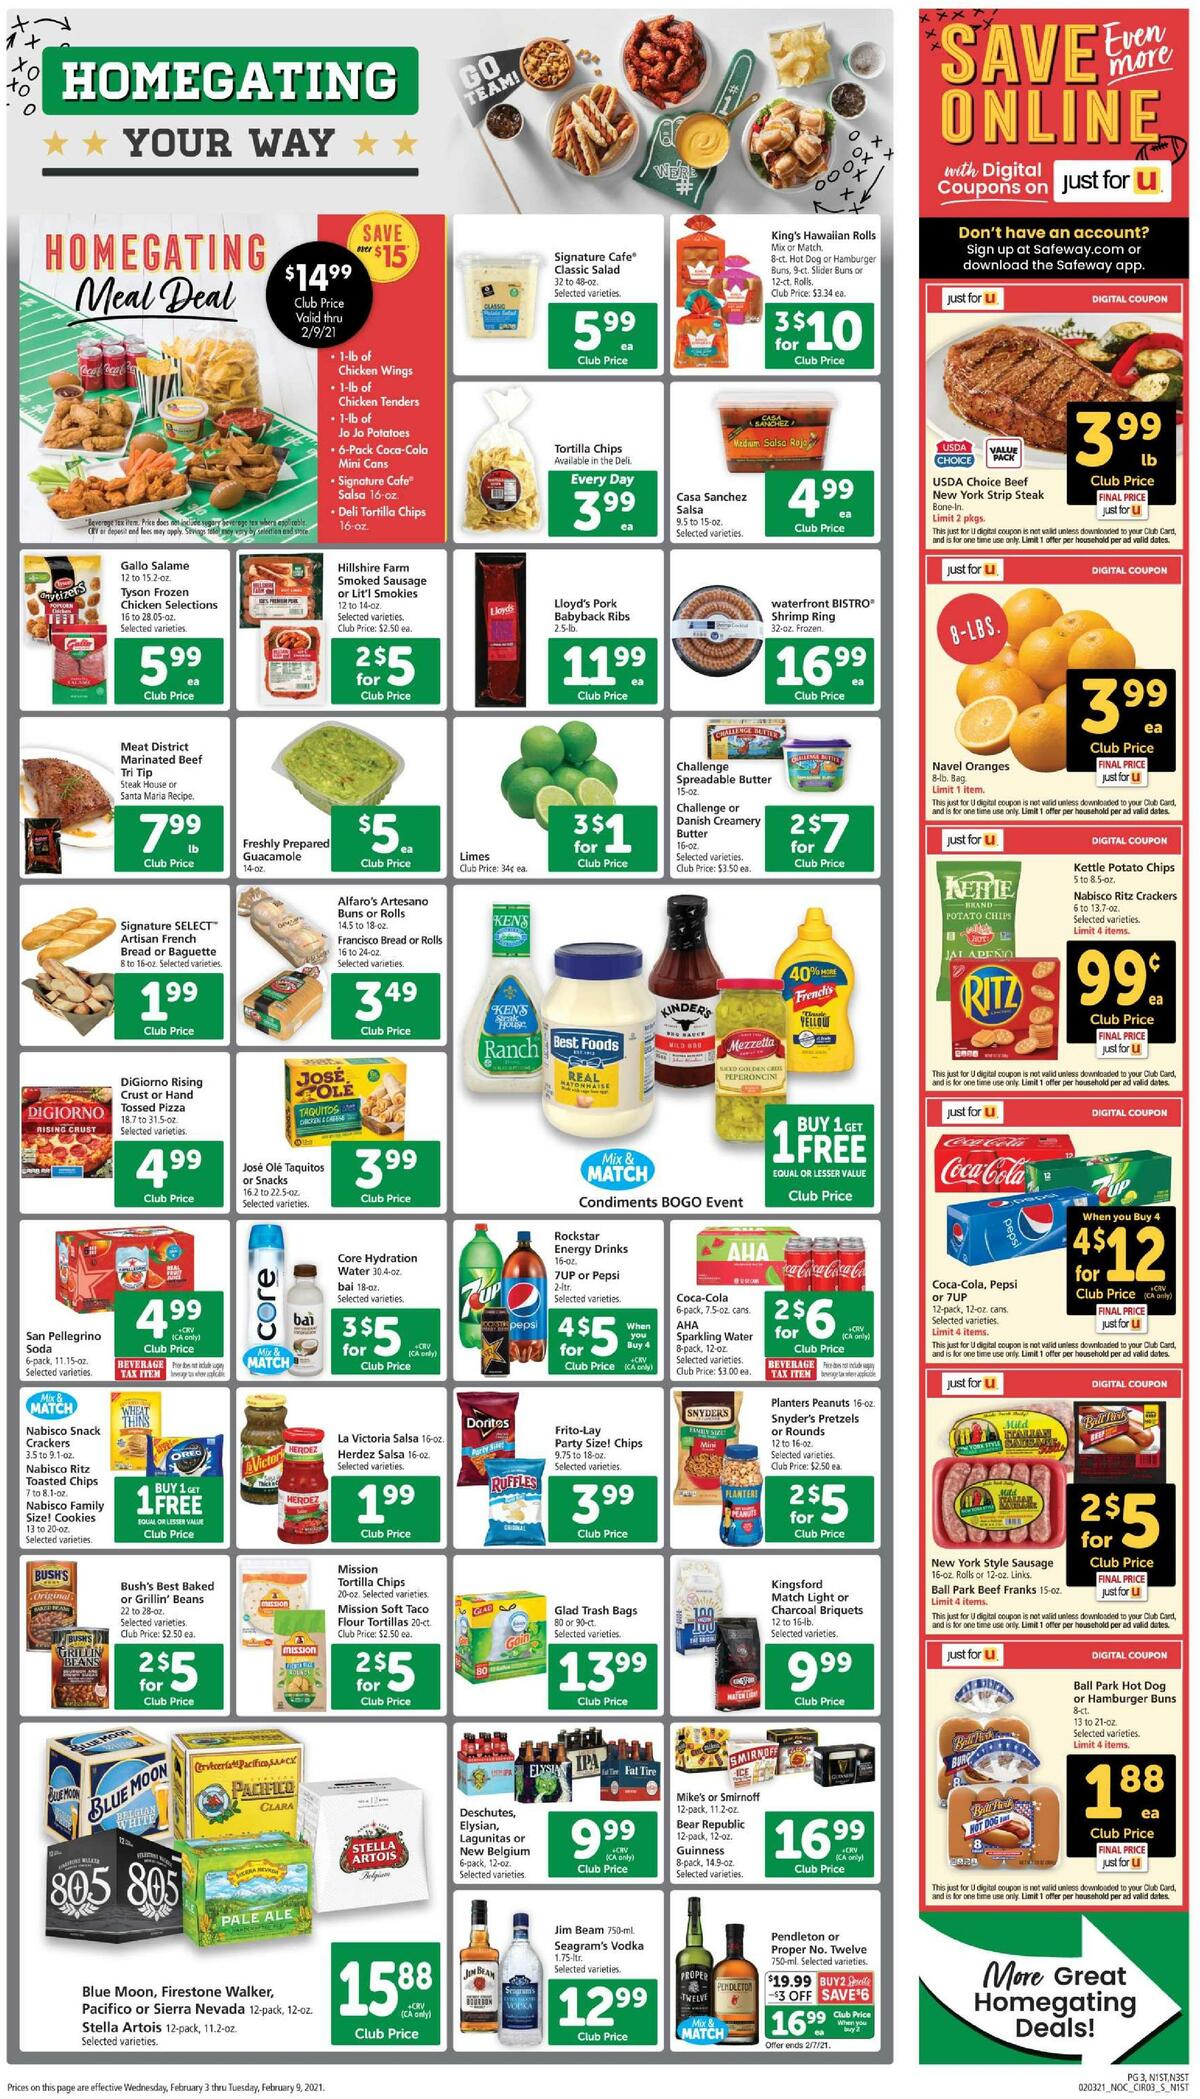 Safeway Weekly Ad from February 3